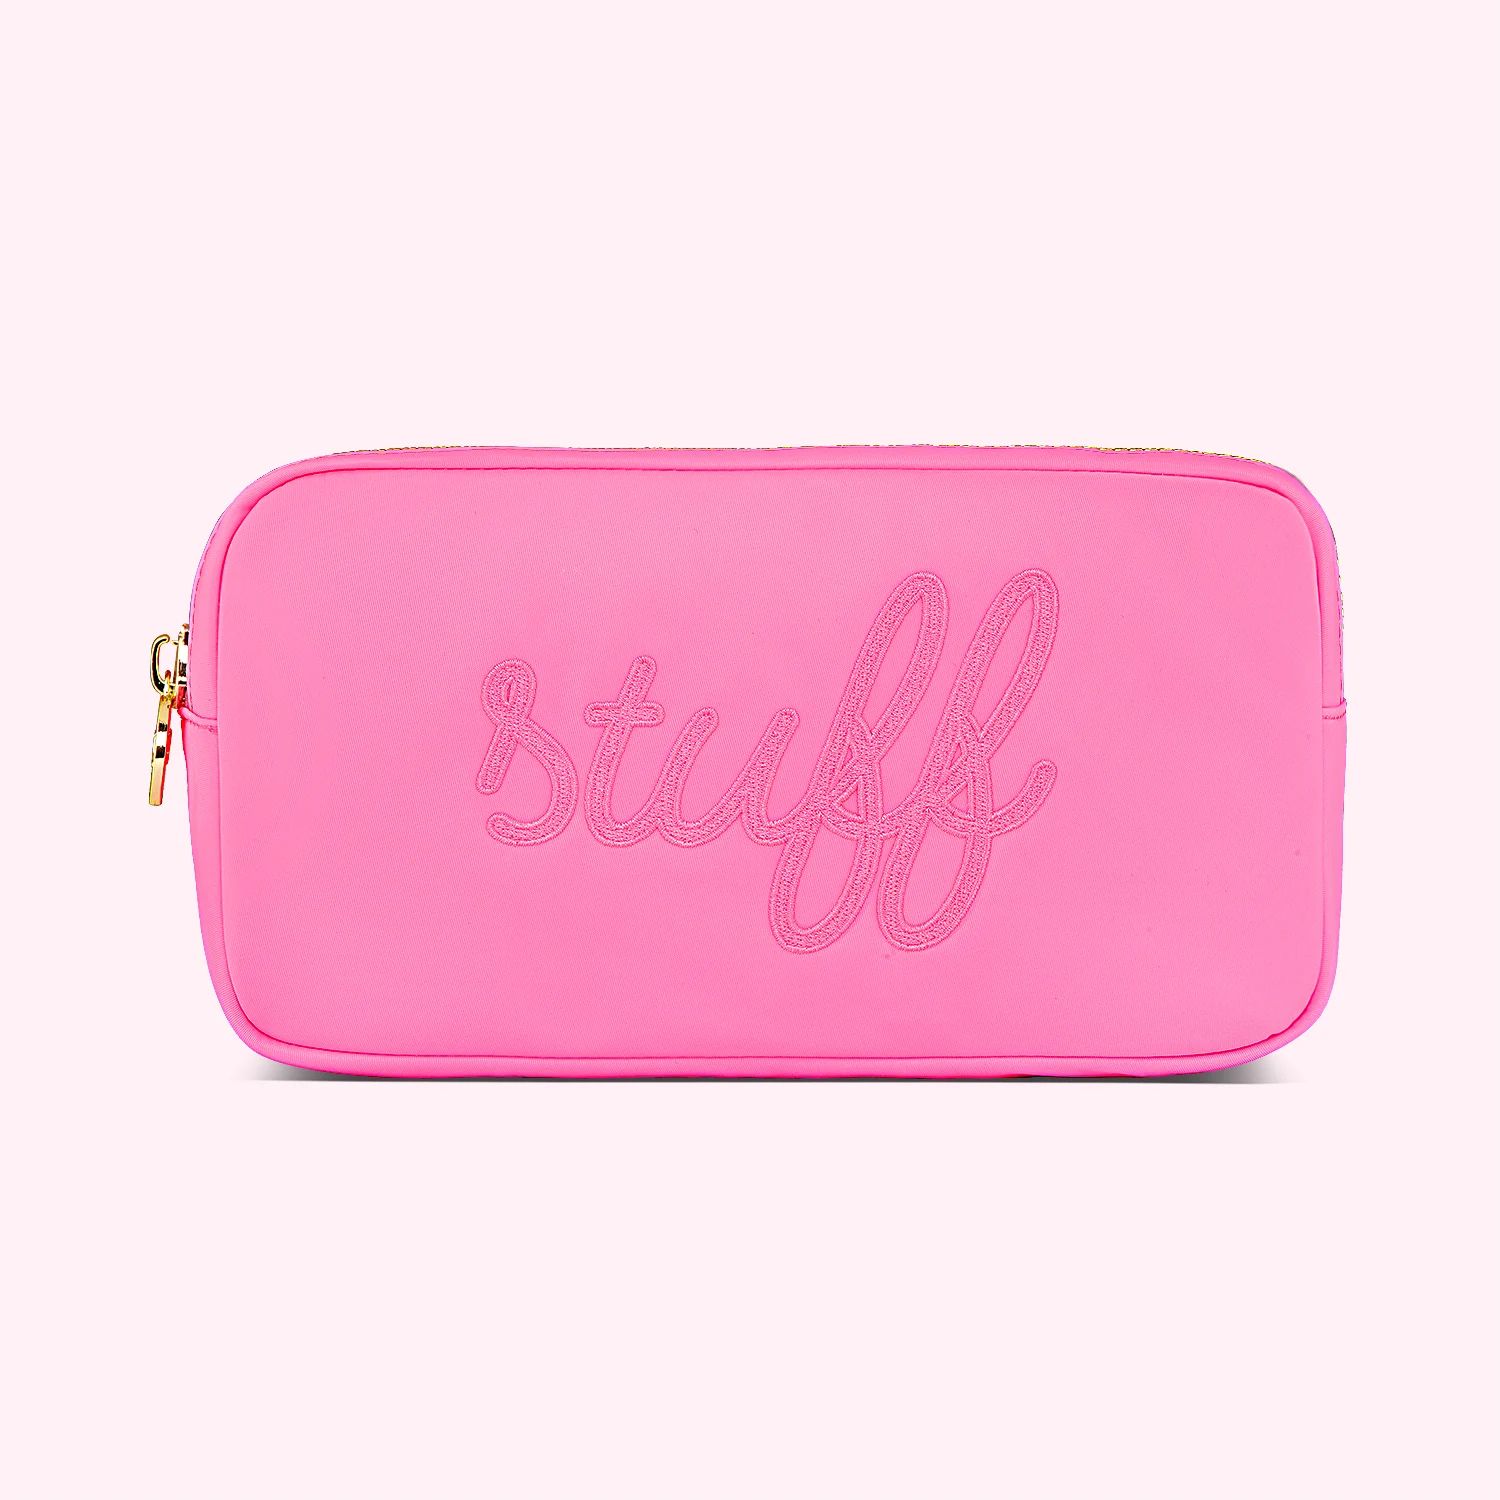 "Stuff" Embroidered Small Pouch | Stoney Clover Lane | Stoney Clover Lane